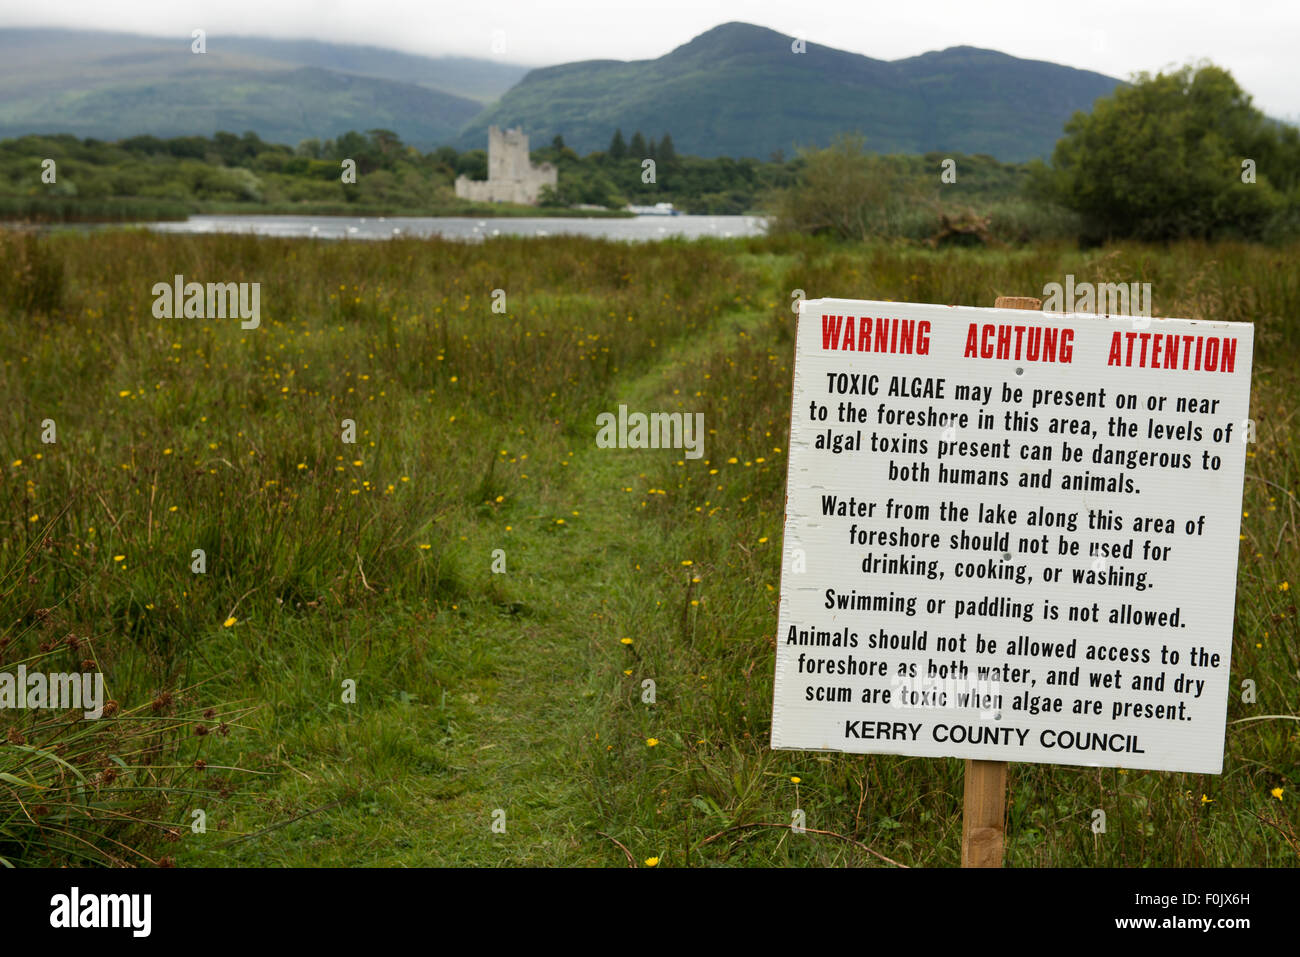 Warning sign for toxic algae in Lough Leane lake which is dangerous for humans and dogs in Killarney National Park, County Kerry, Ireland Stock Photo